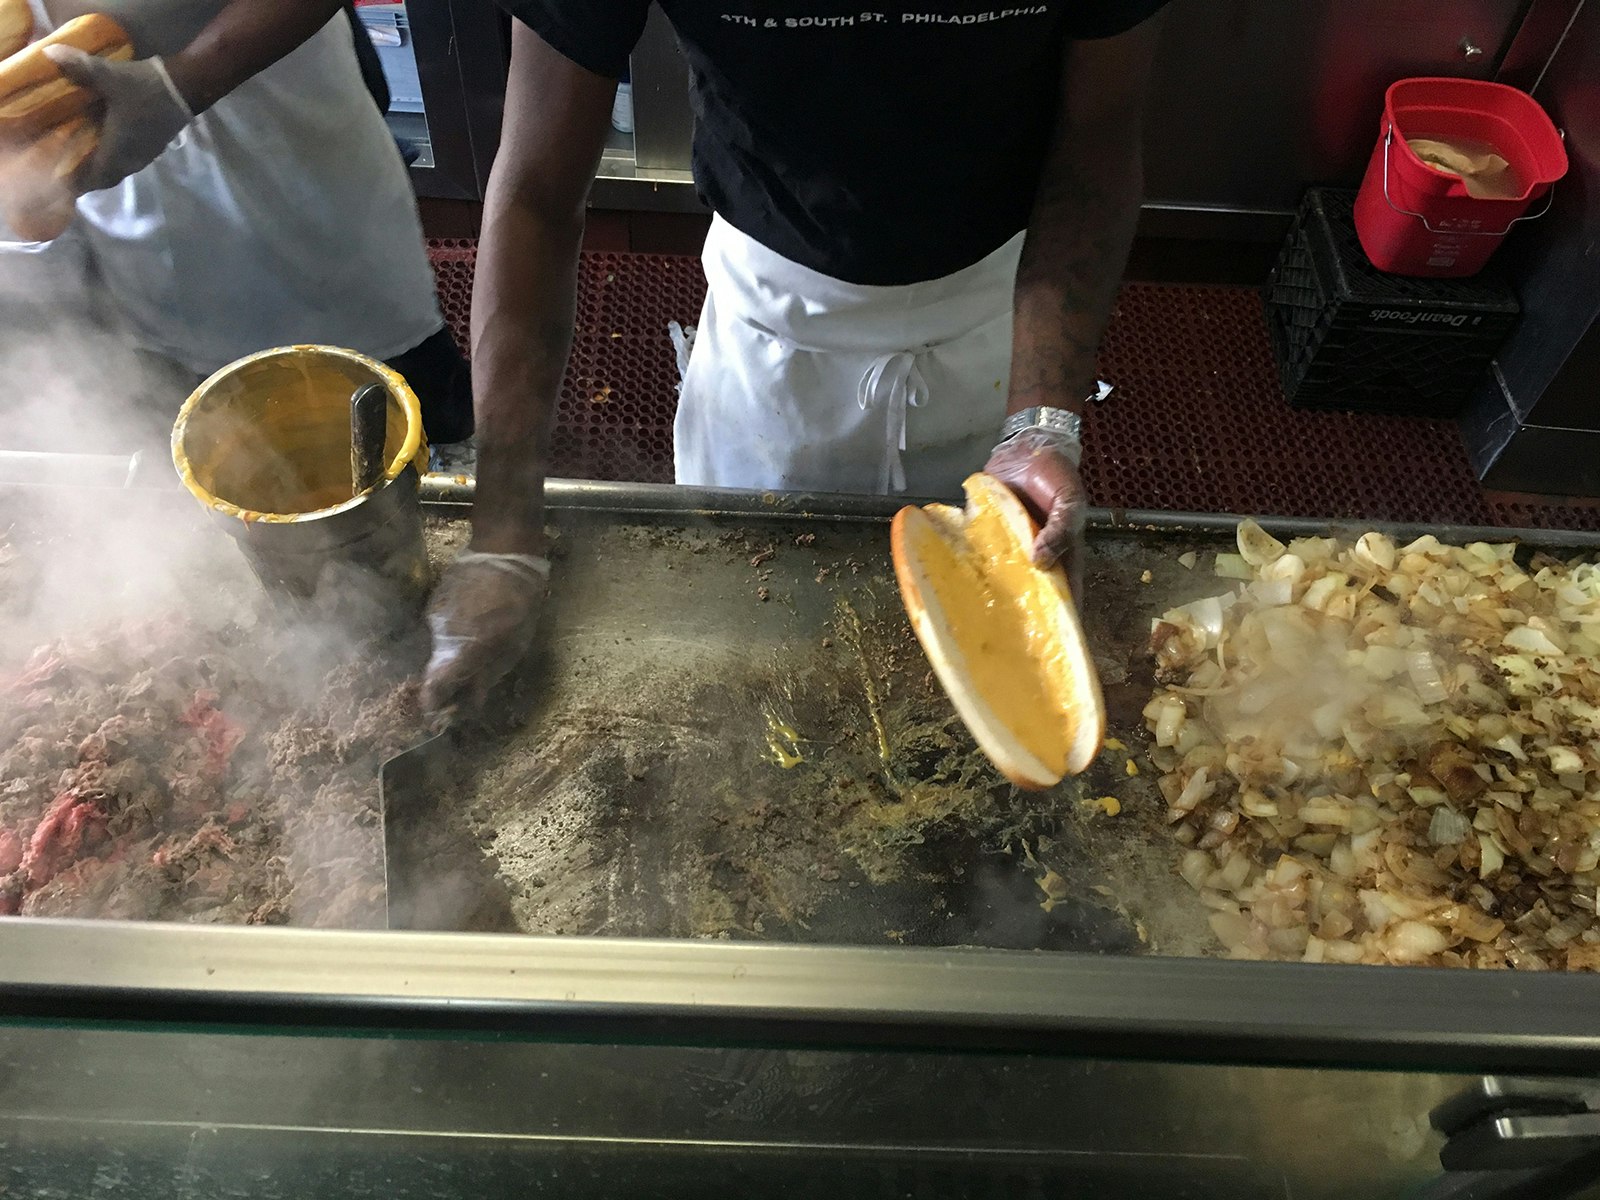 man cooks steak and onions over a hot grill at jim's steaks in philadelphia